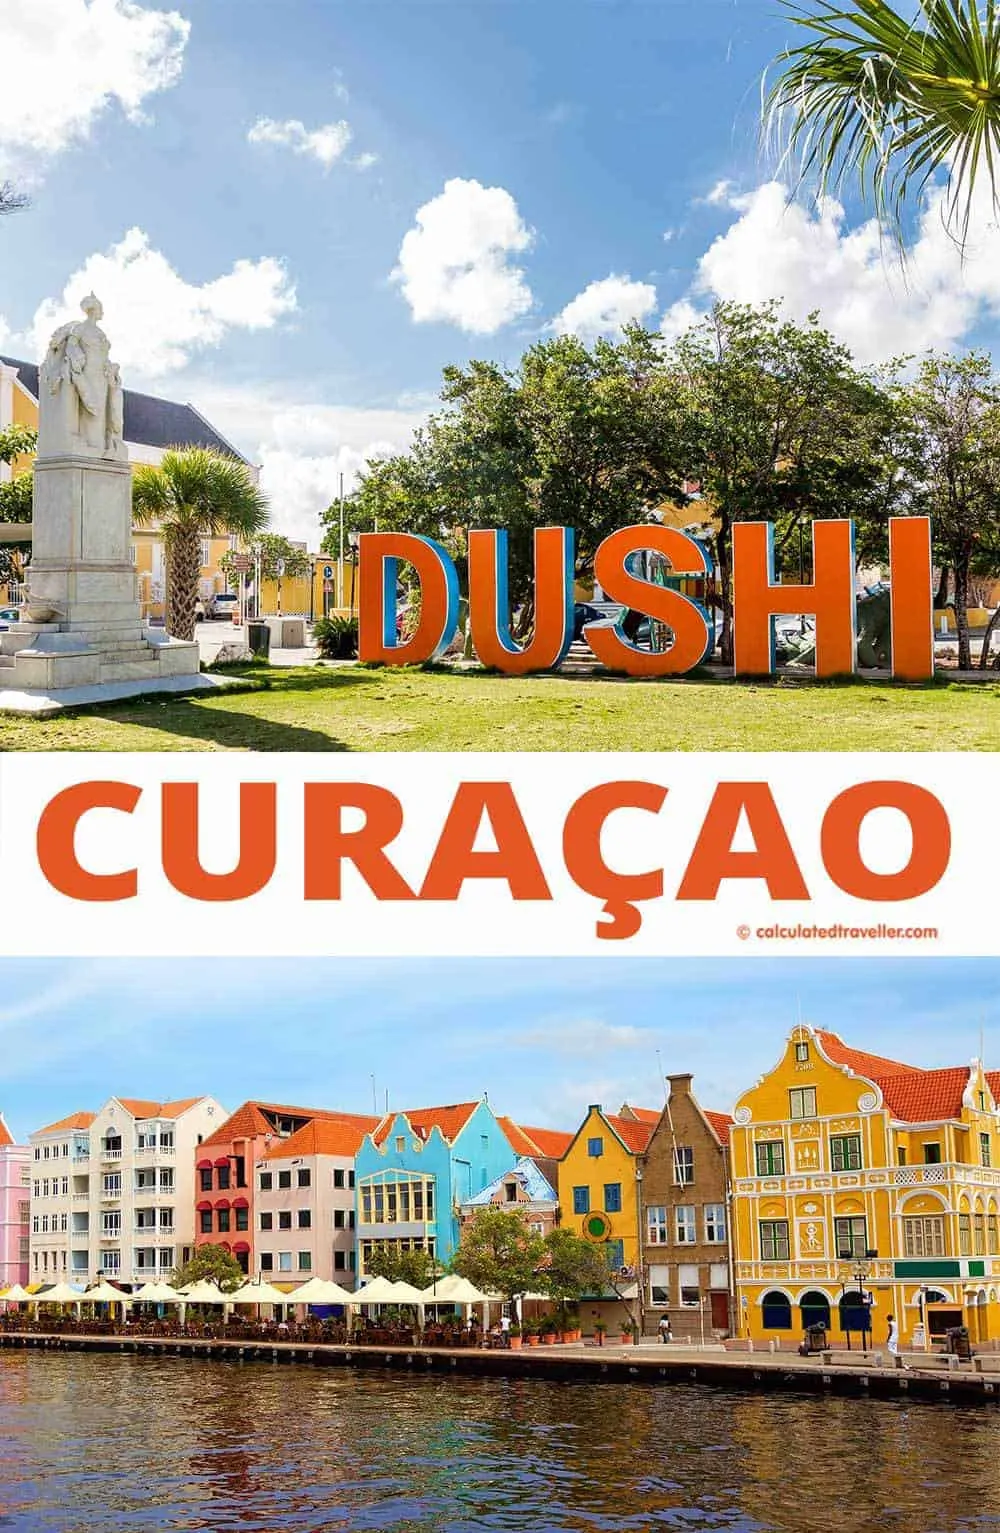 Discovering the meaning of Dushi Curacao  |  #Curacao #travel #Dushi #Caribbean #travel